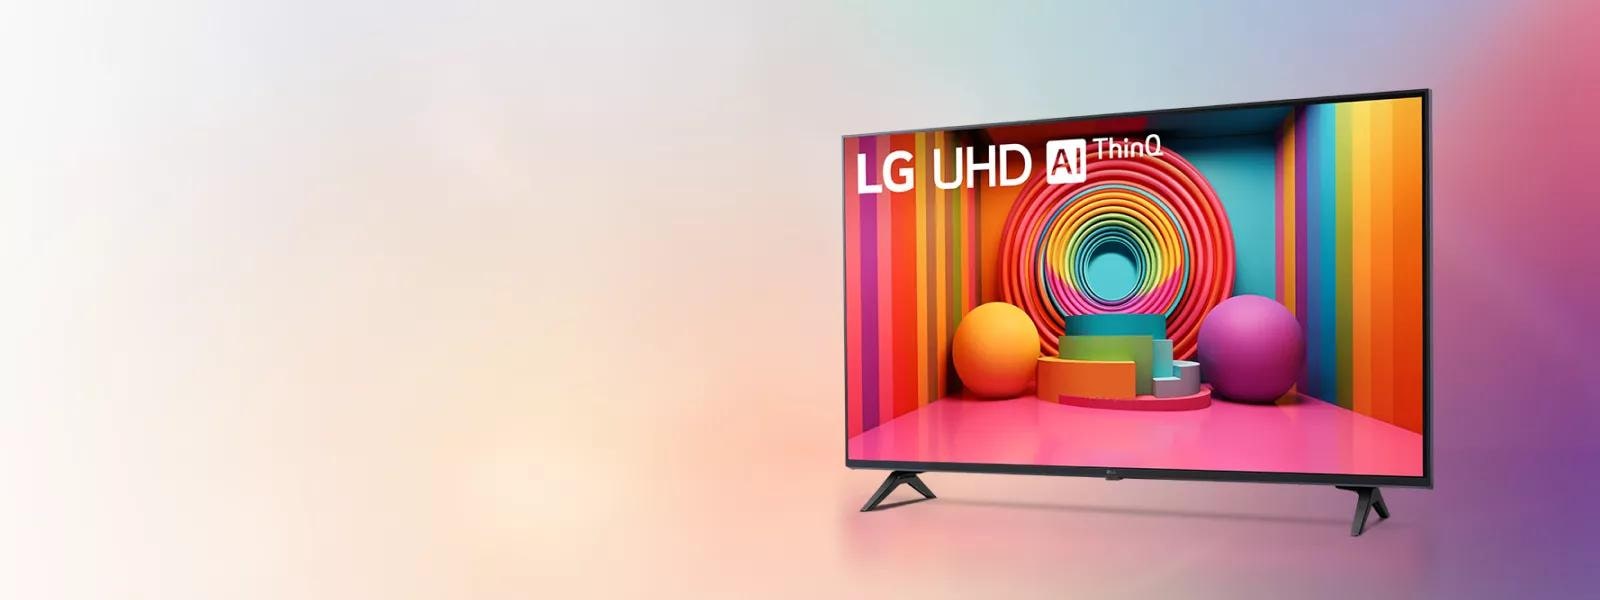 With stunning 4K resolution, impressive screen sizes and 300+ free LG channels, turn every watch into an event with our UT75 UHD.